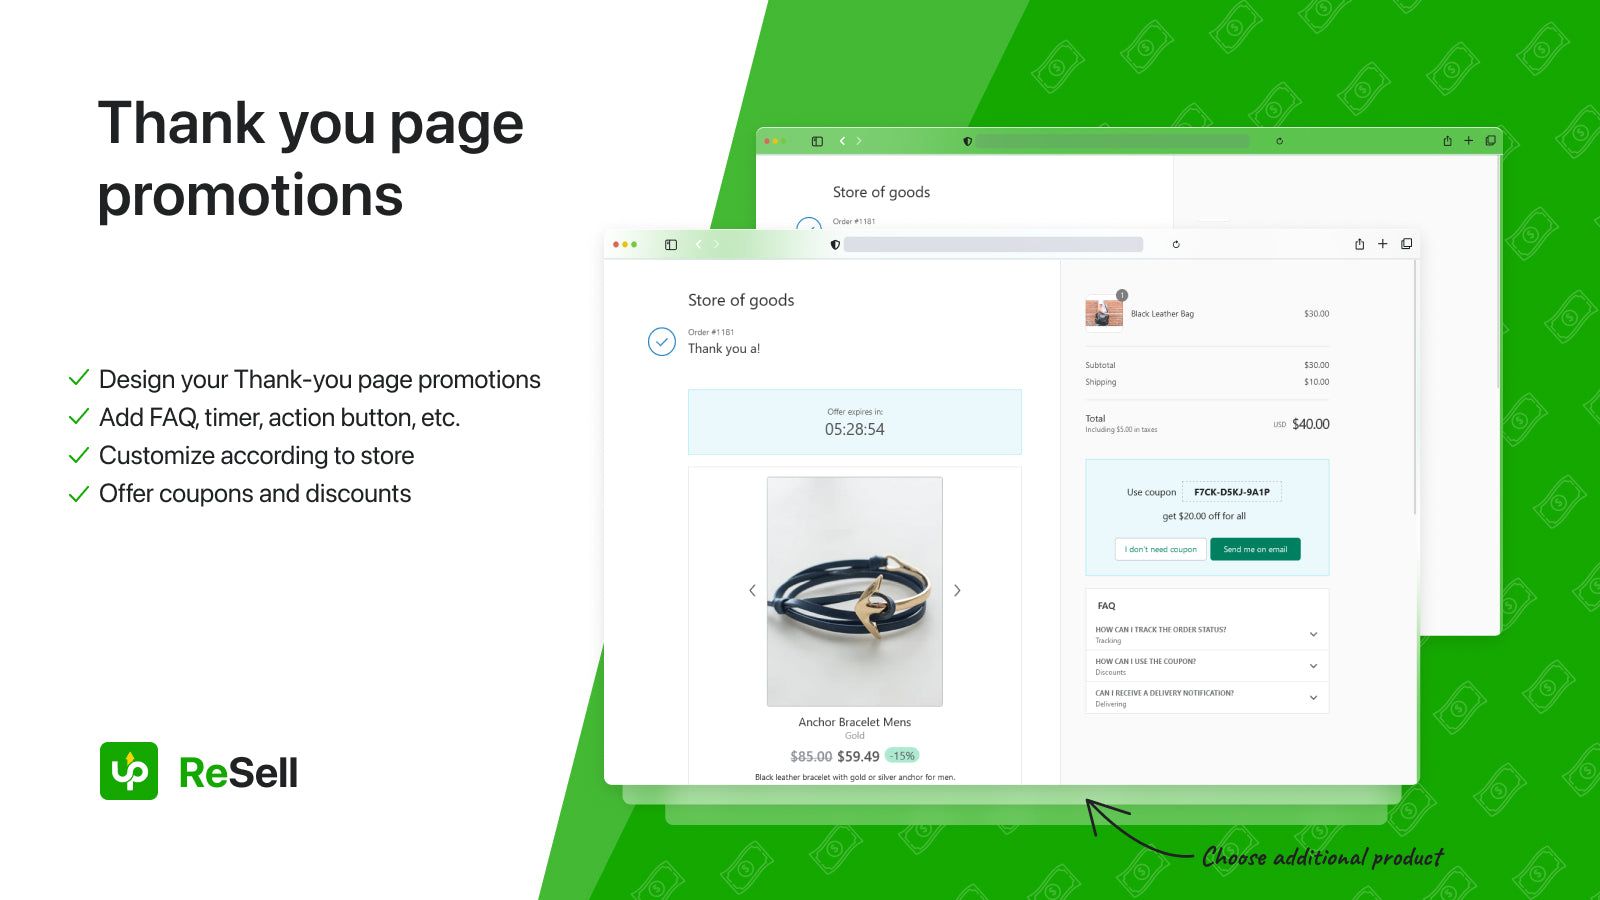 Thank-you page customization with multiple up sell widgets